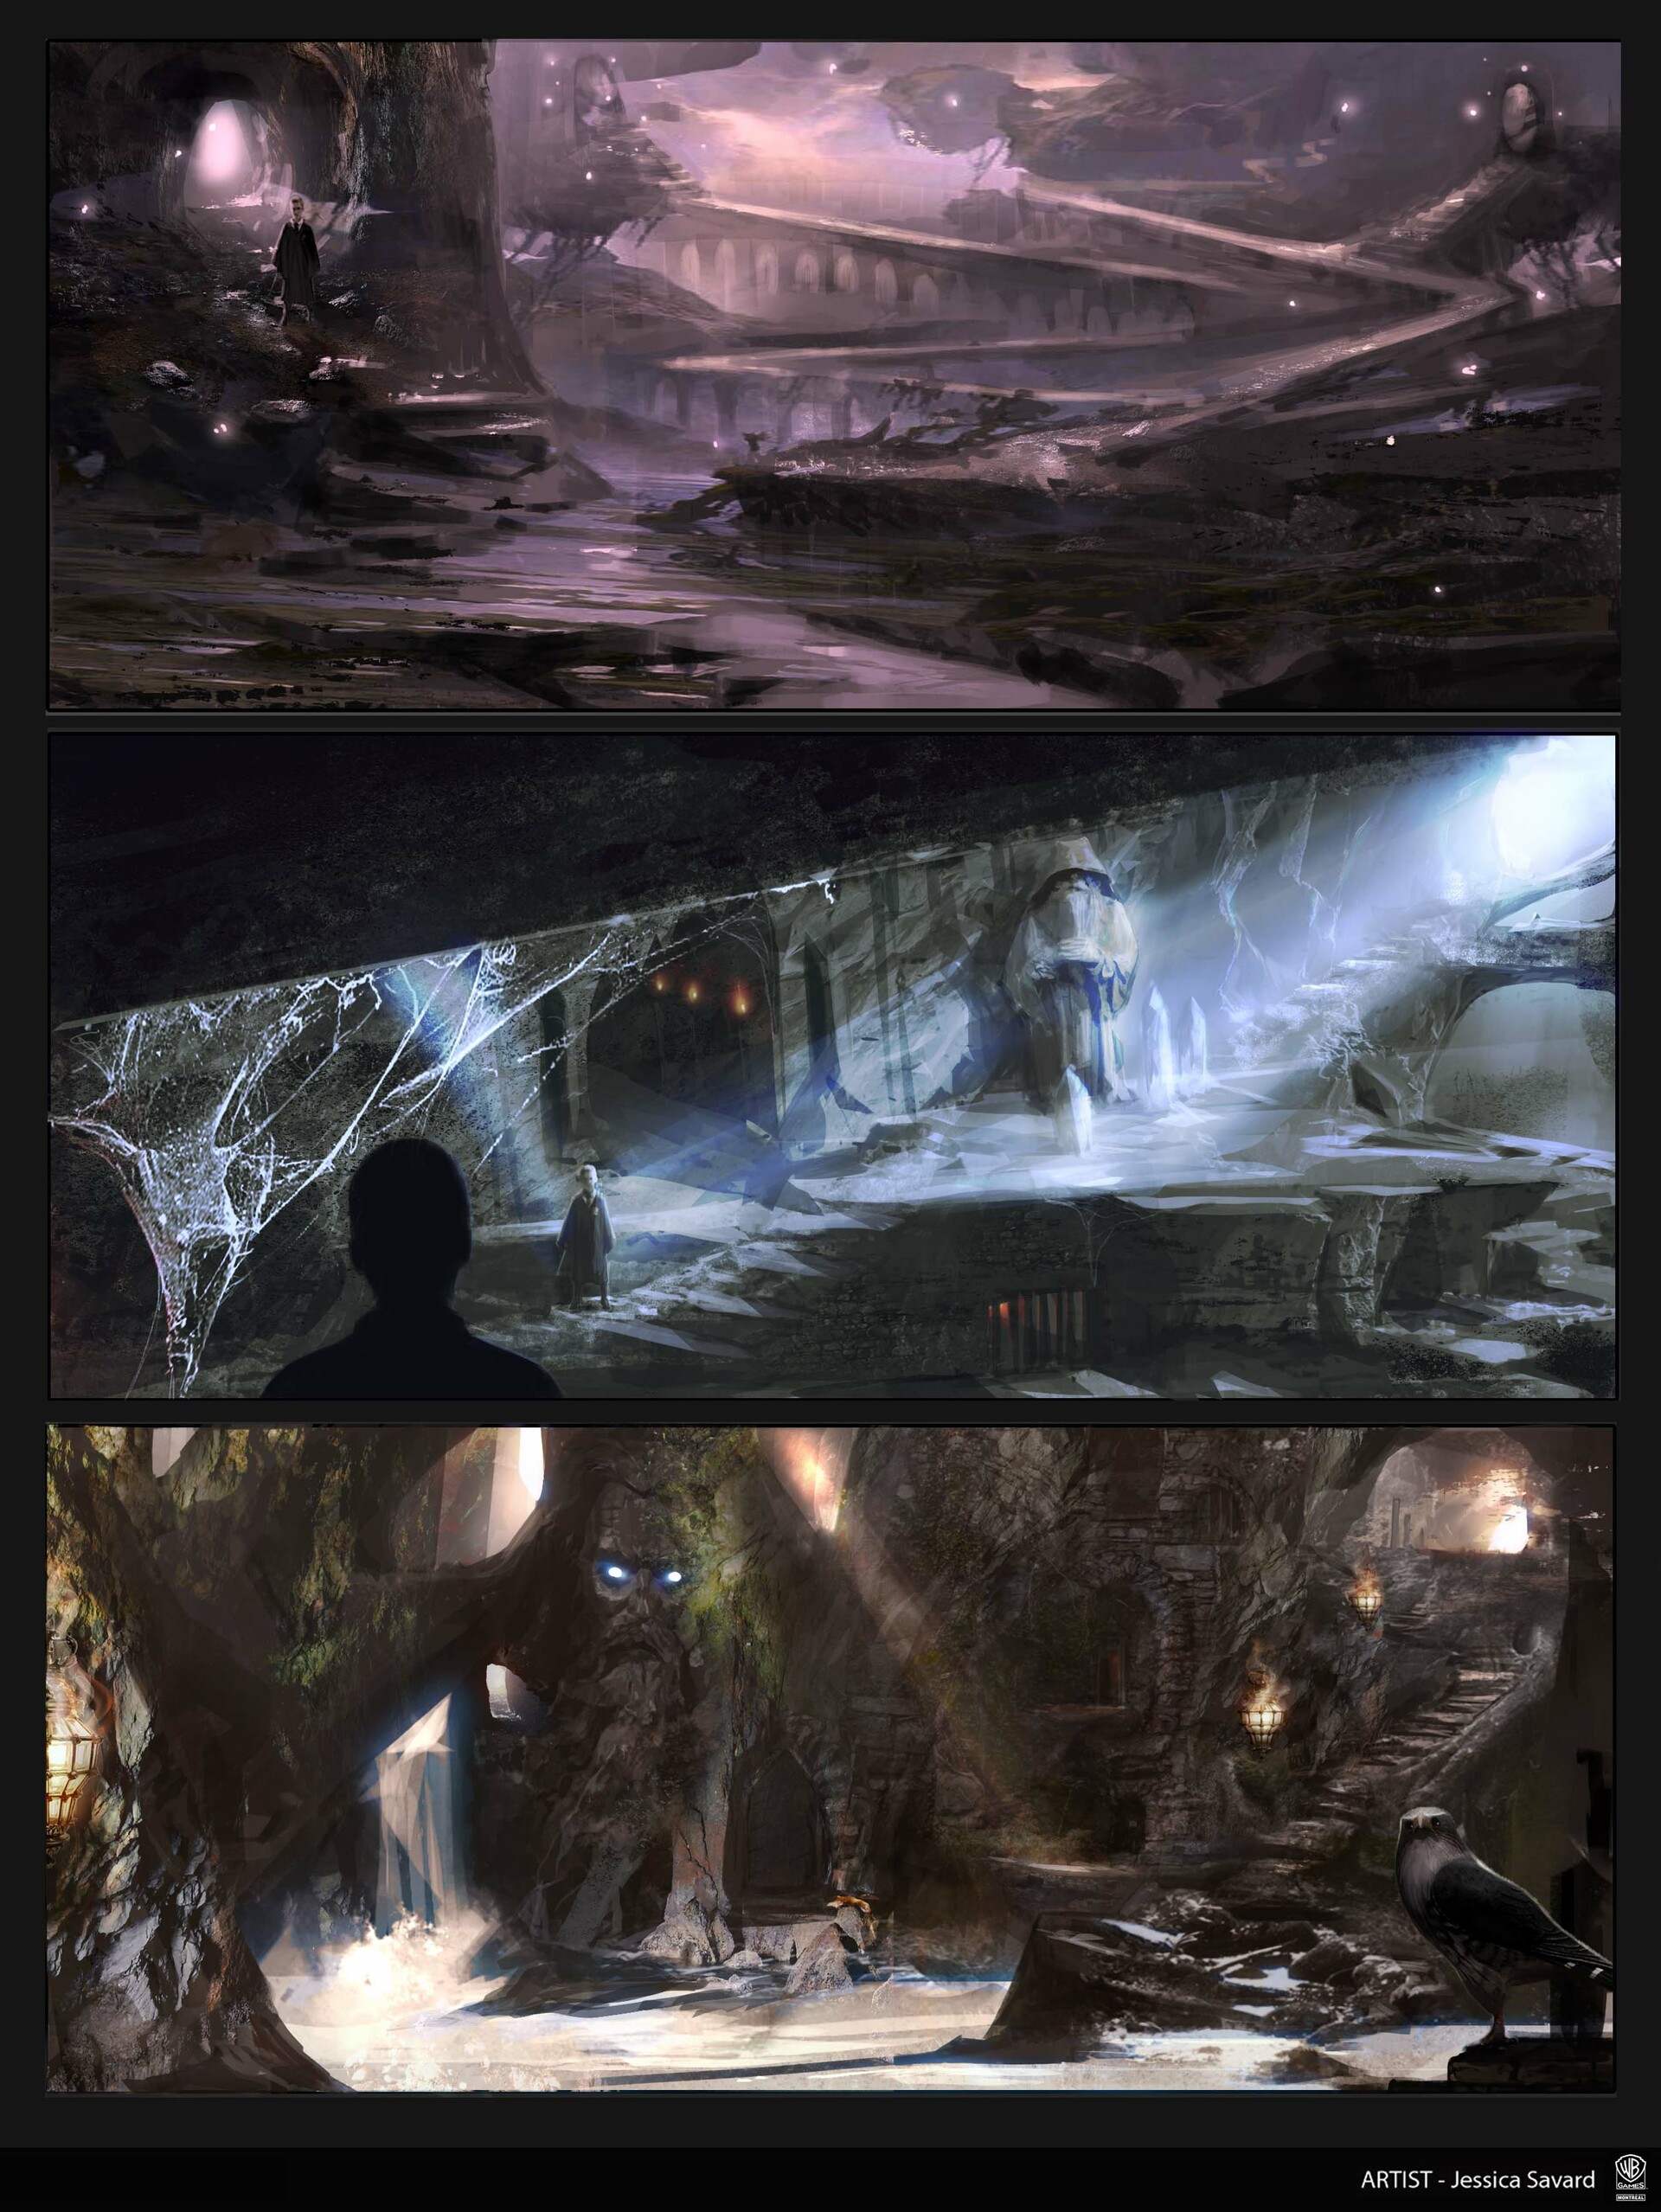 Jessica Savard - MK11 Krypt Temple and environments sketches